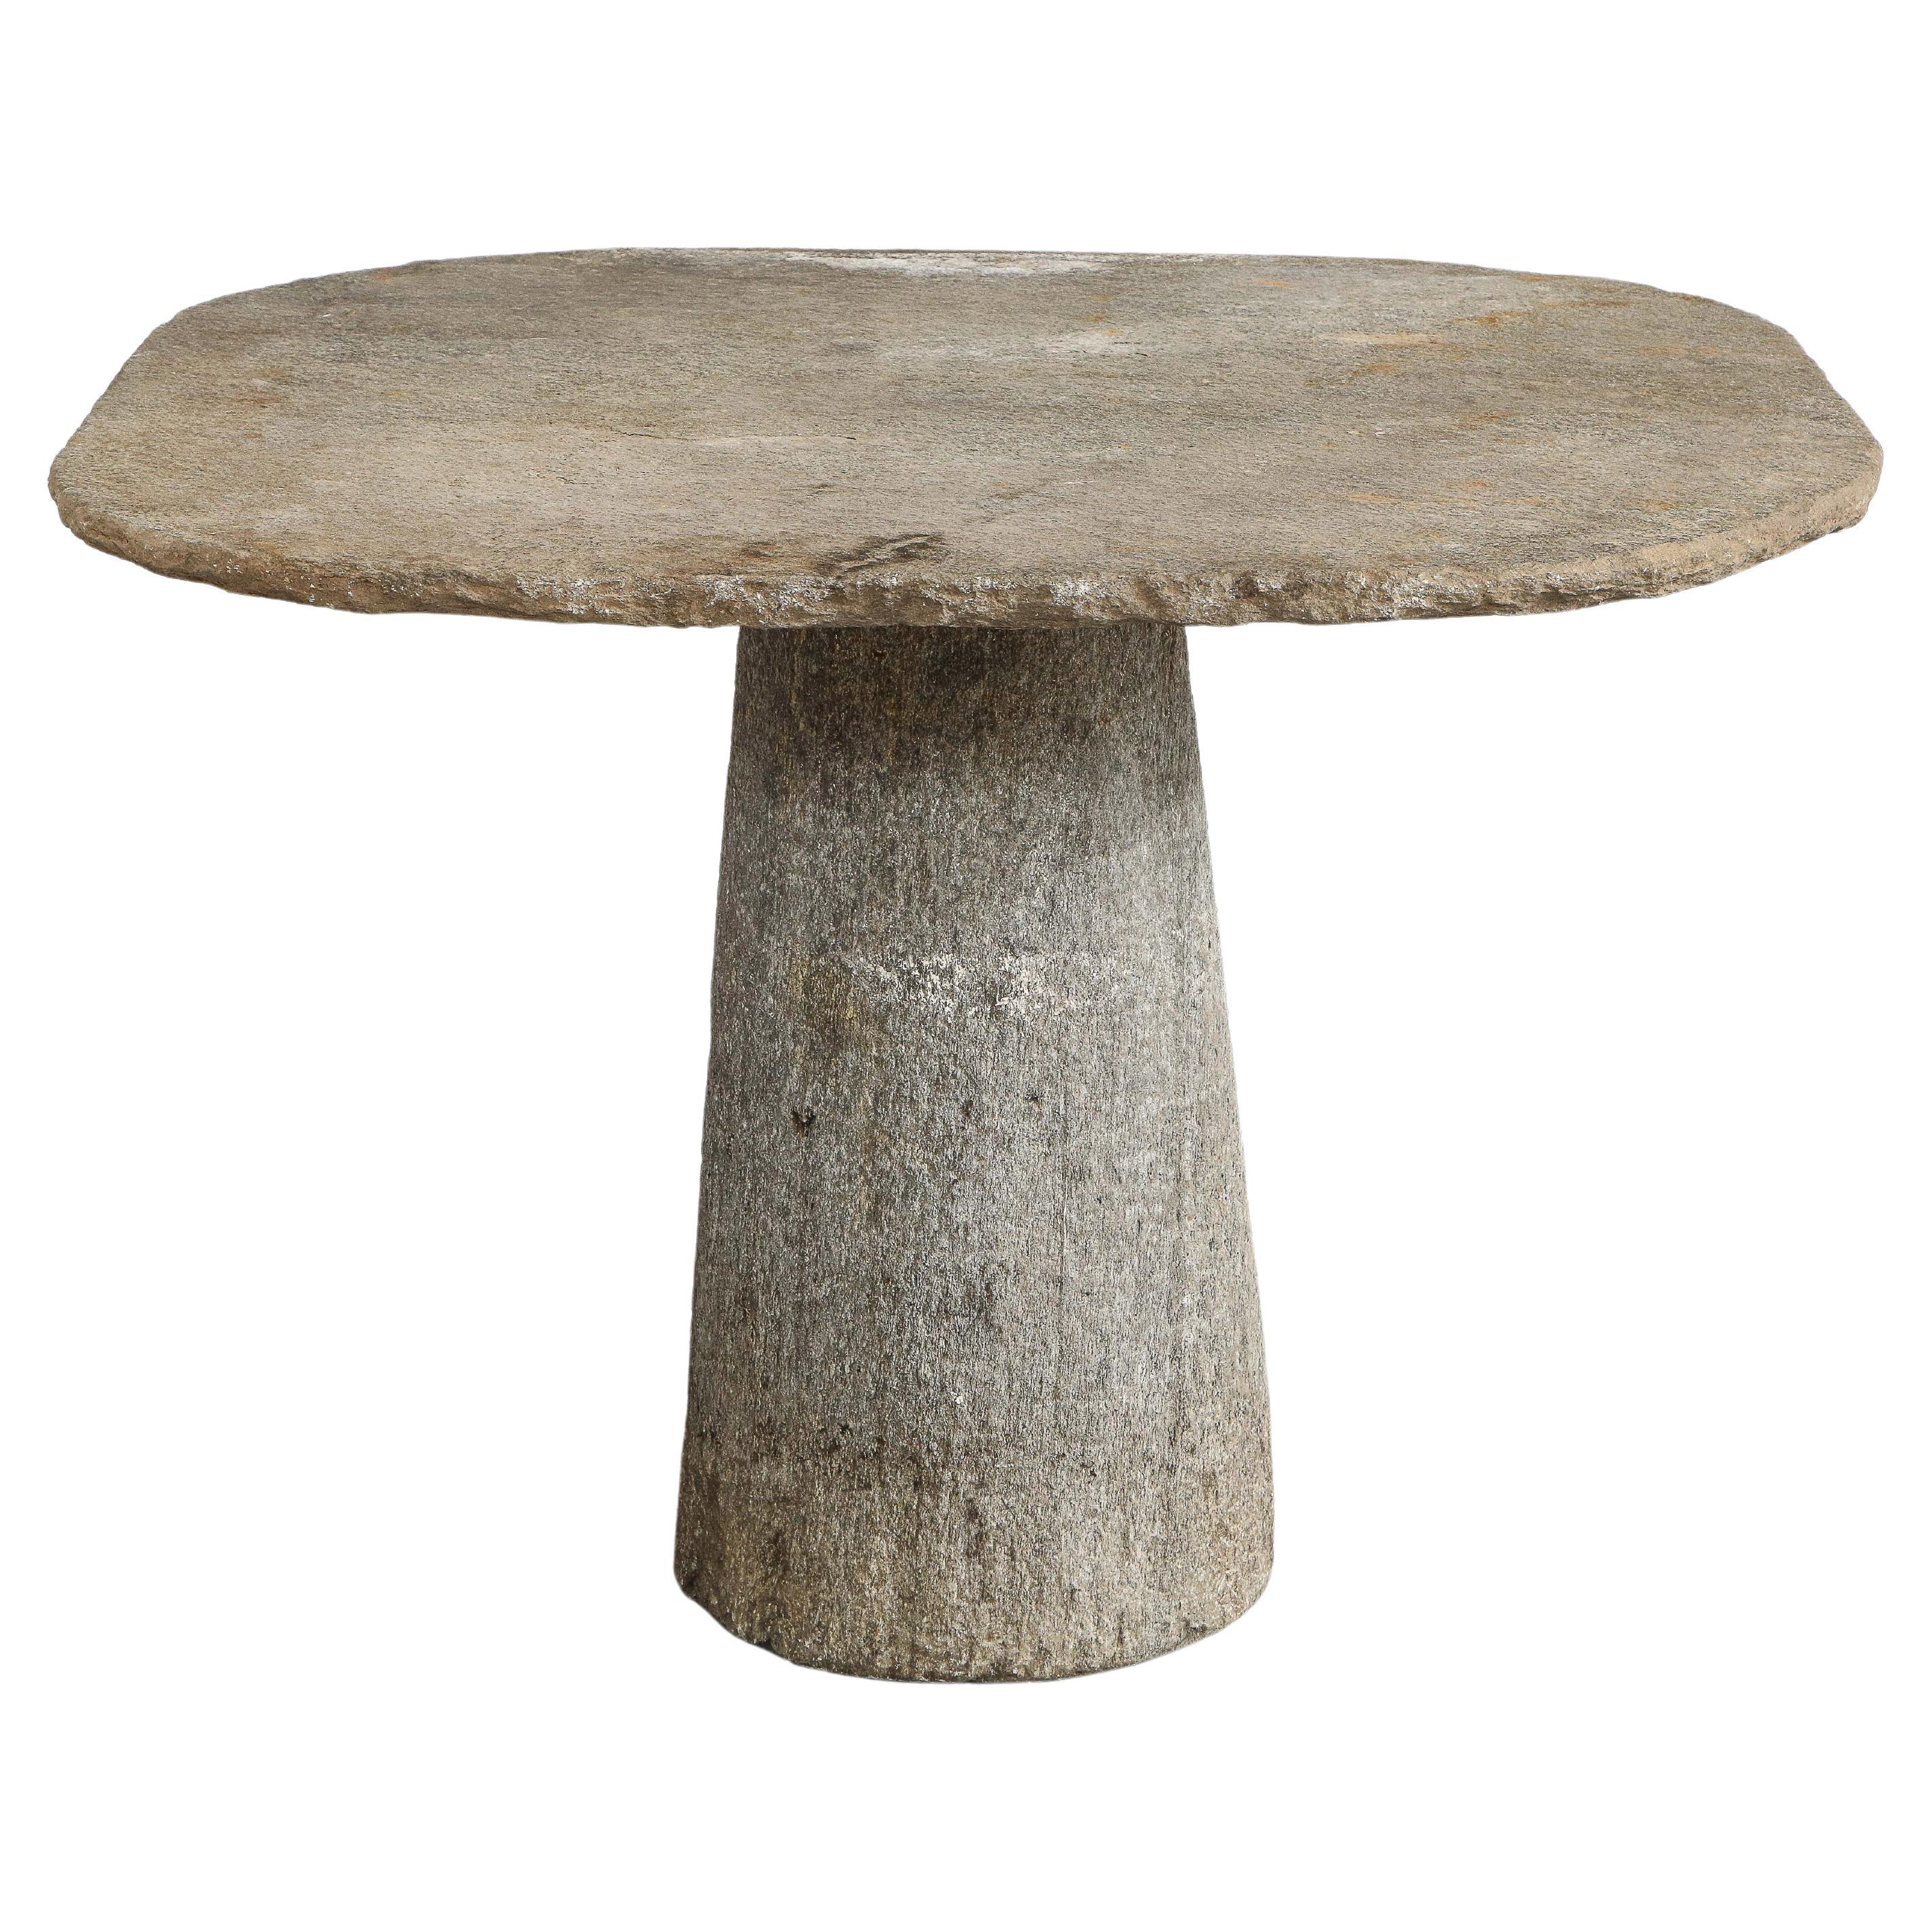 Lucerne Hard Stone Pedestal Table, Piedmont, Northern Italy